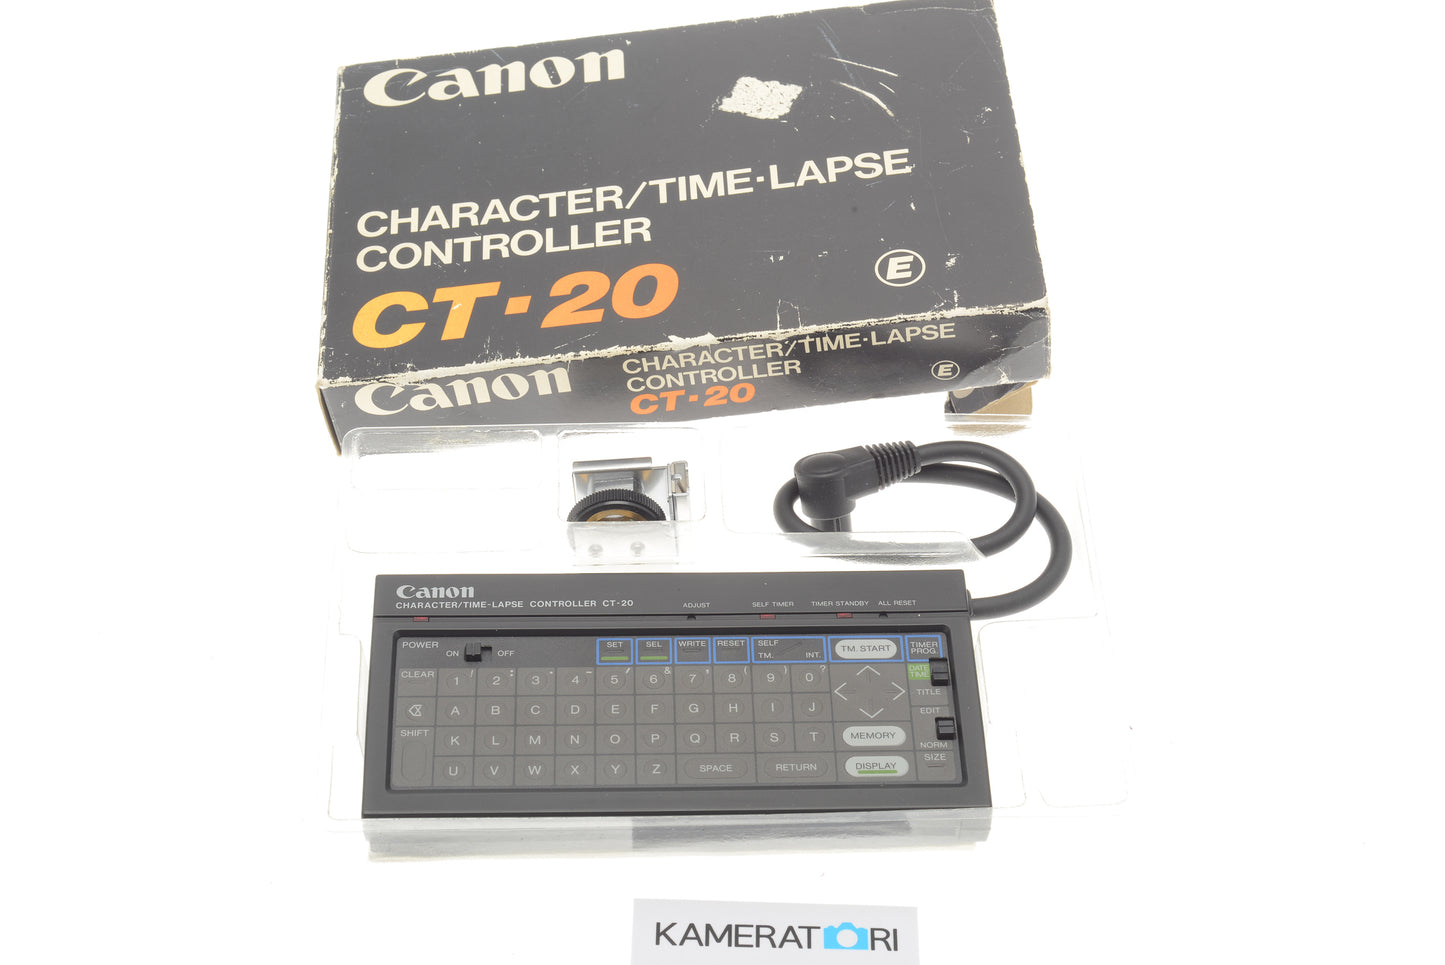 Canon Character / Time-Lapse Controller CT-20